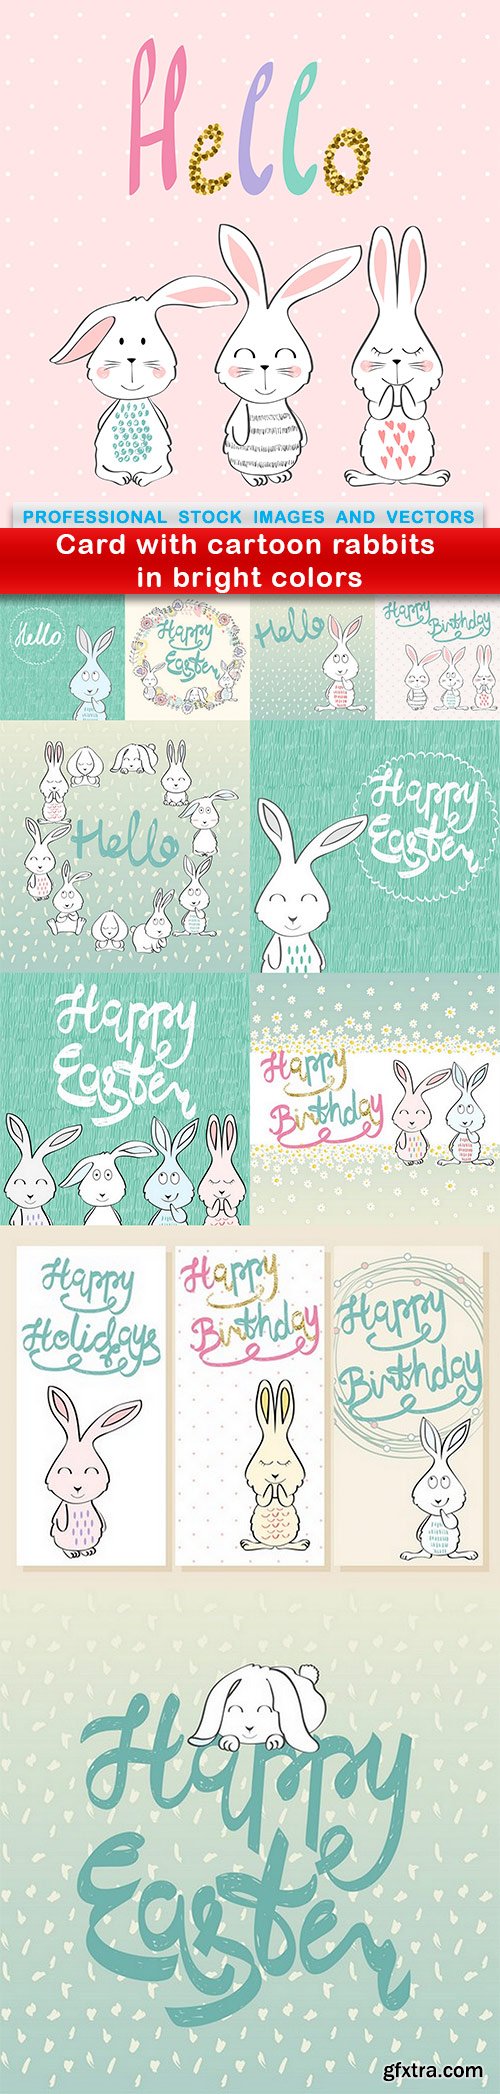 Card with cartoon rabbits in bright colors - 11 EPS